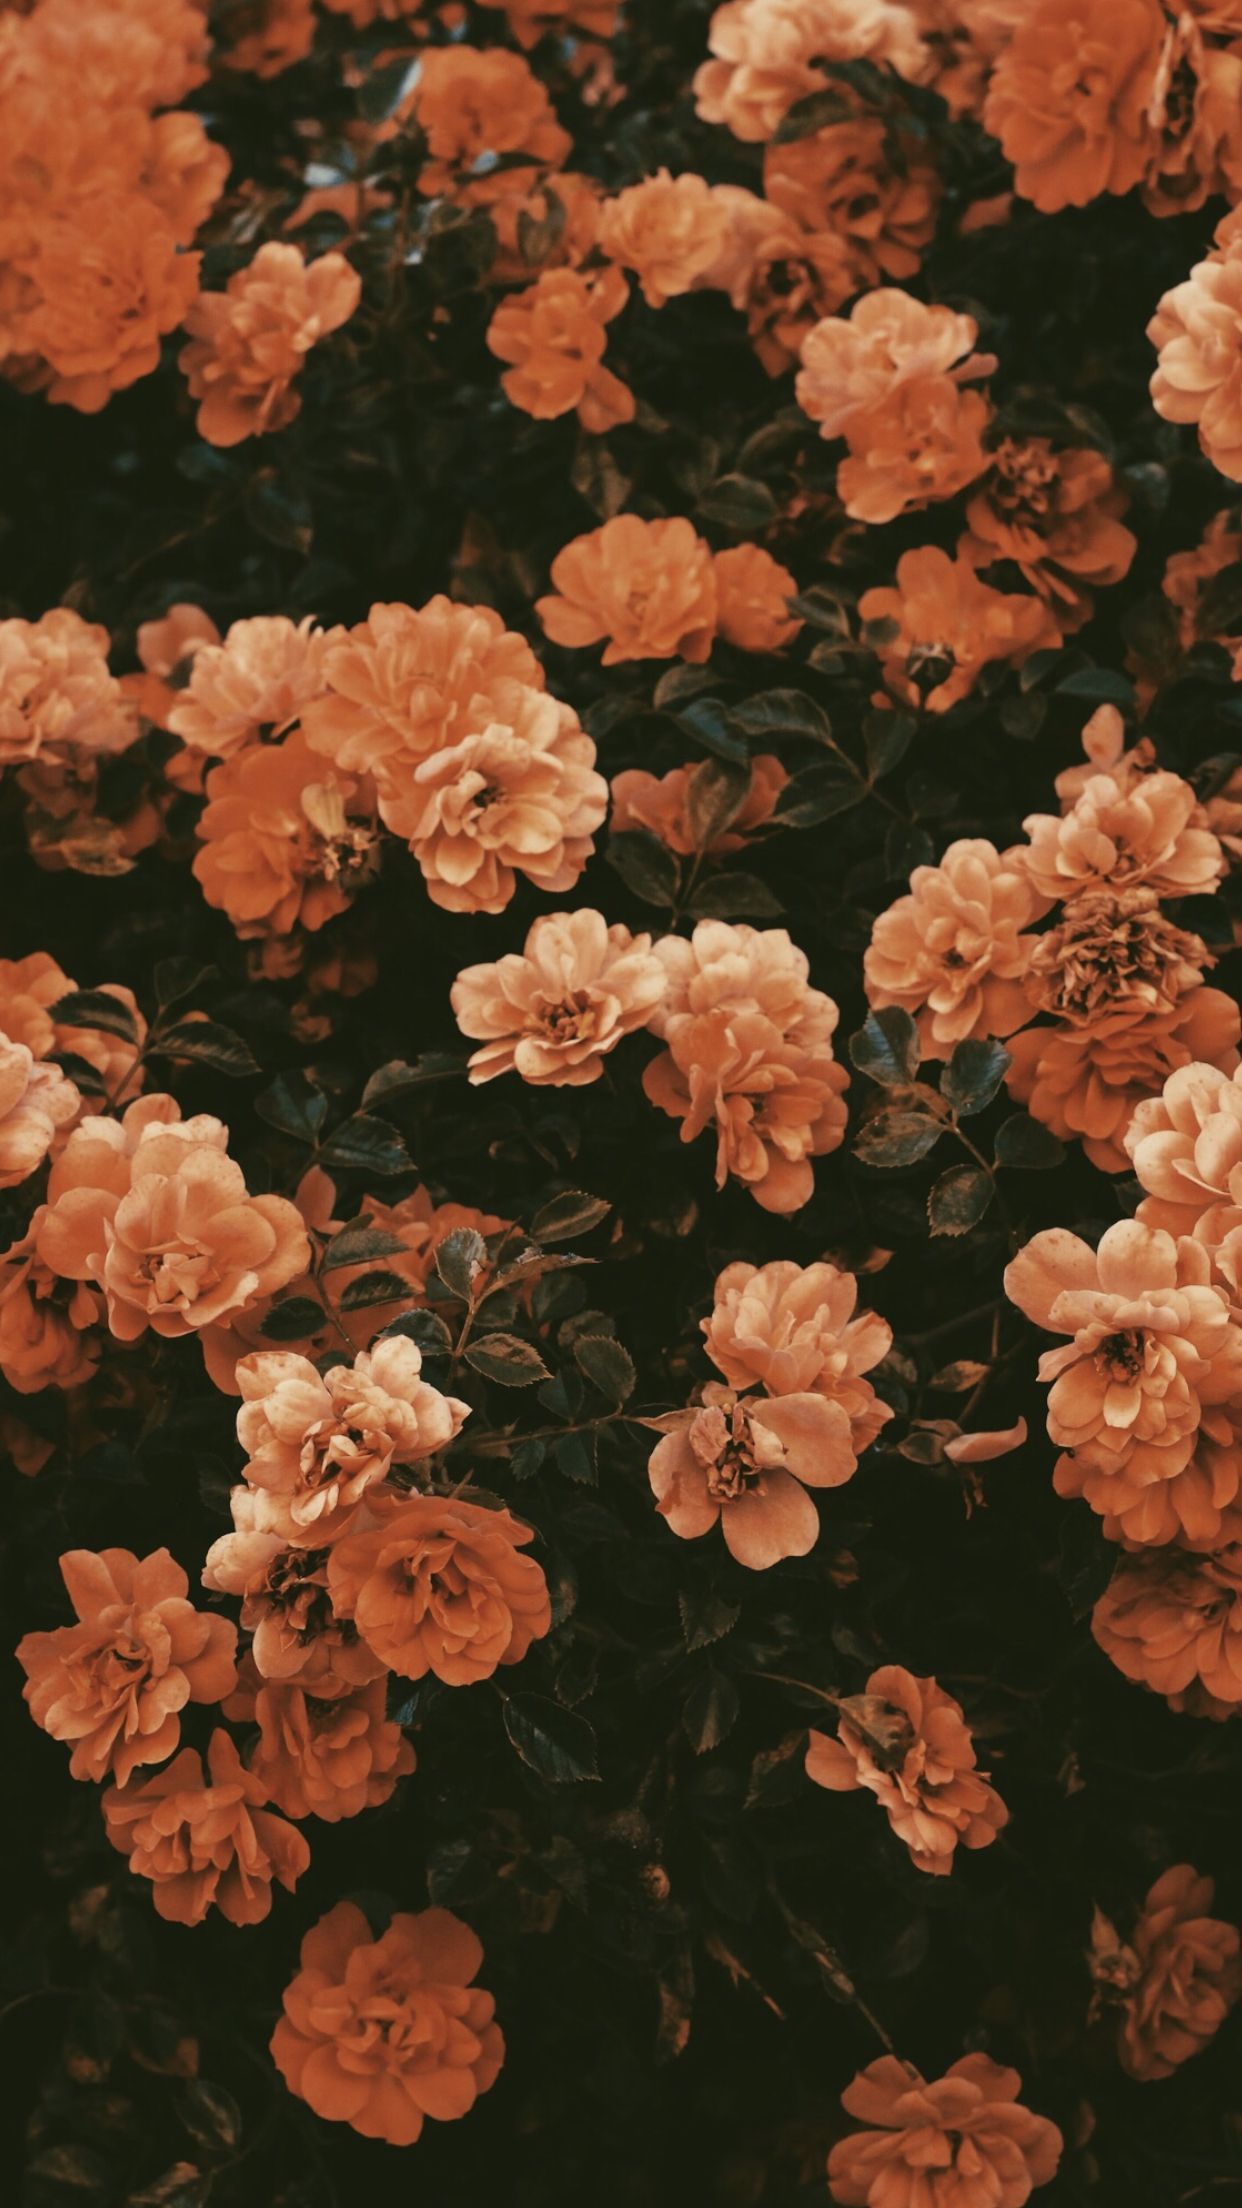 Fall flowers. Flower background iphone, Vintage flower background, Flower iphone wallpaper